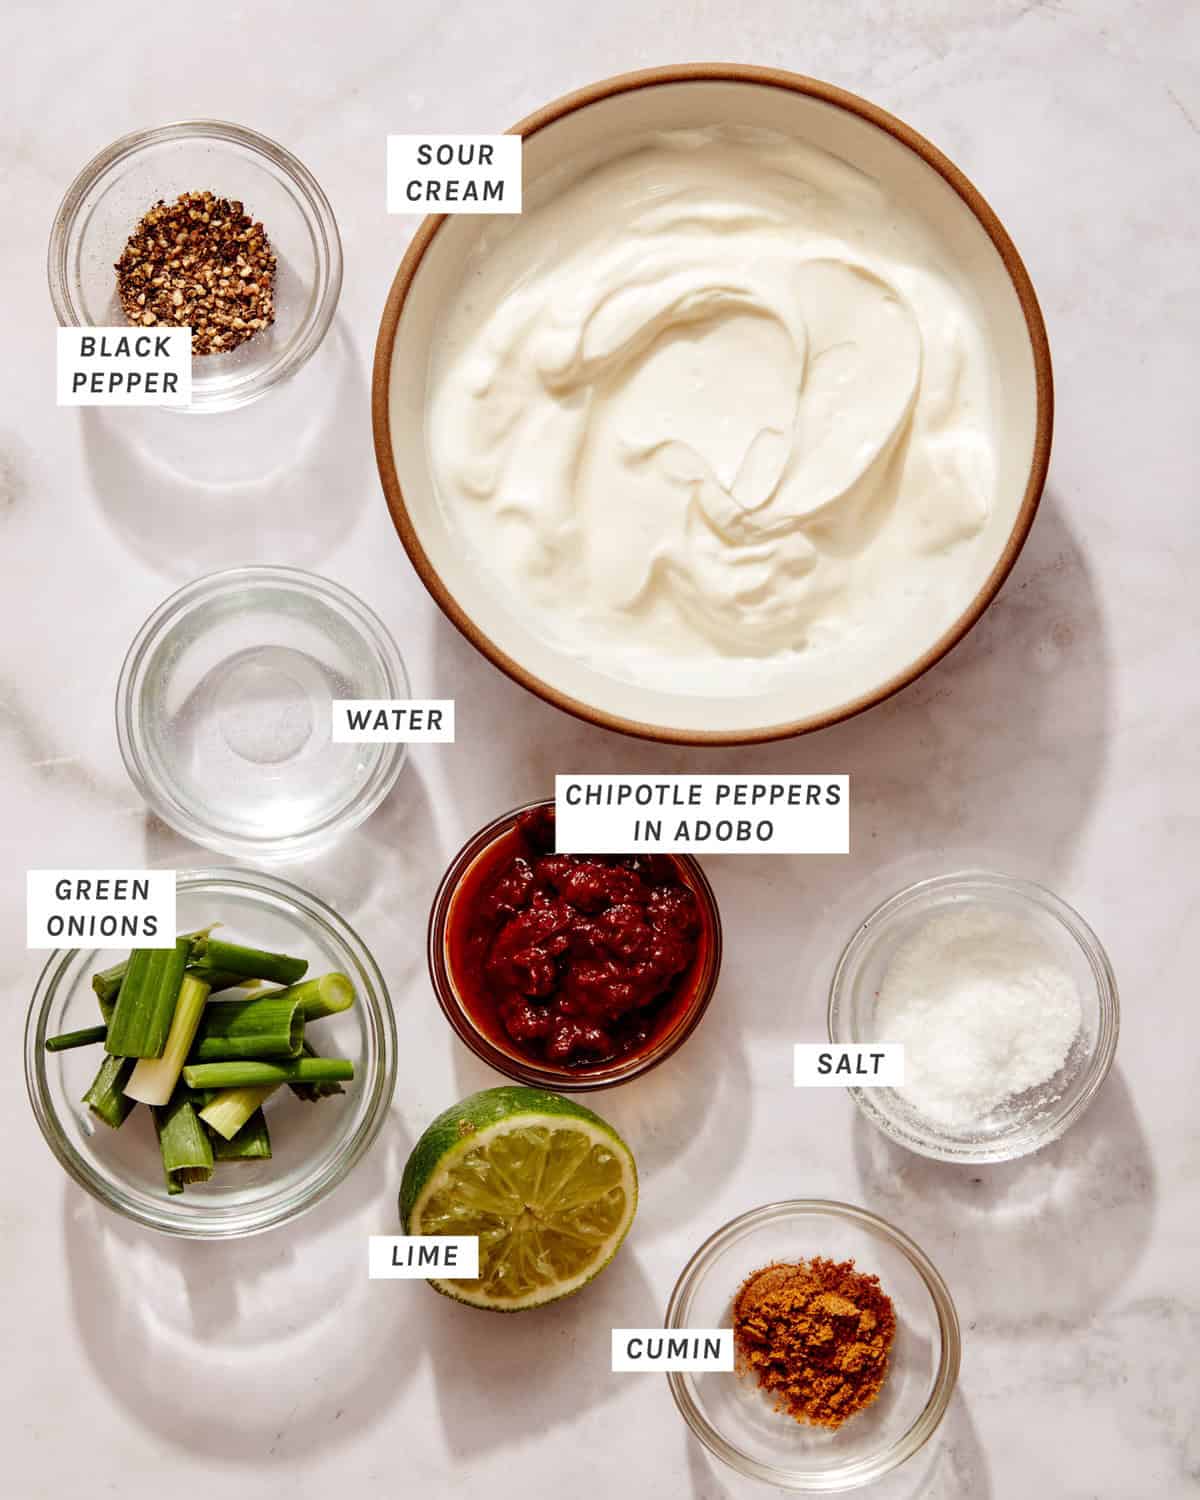 Taco salad dressing ingredients to make a creamy chipotle dressing.